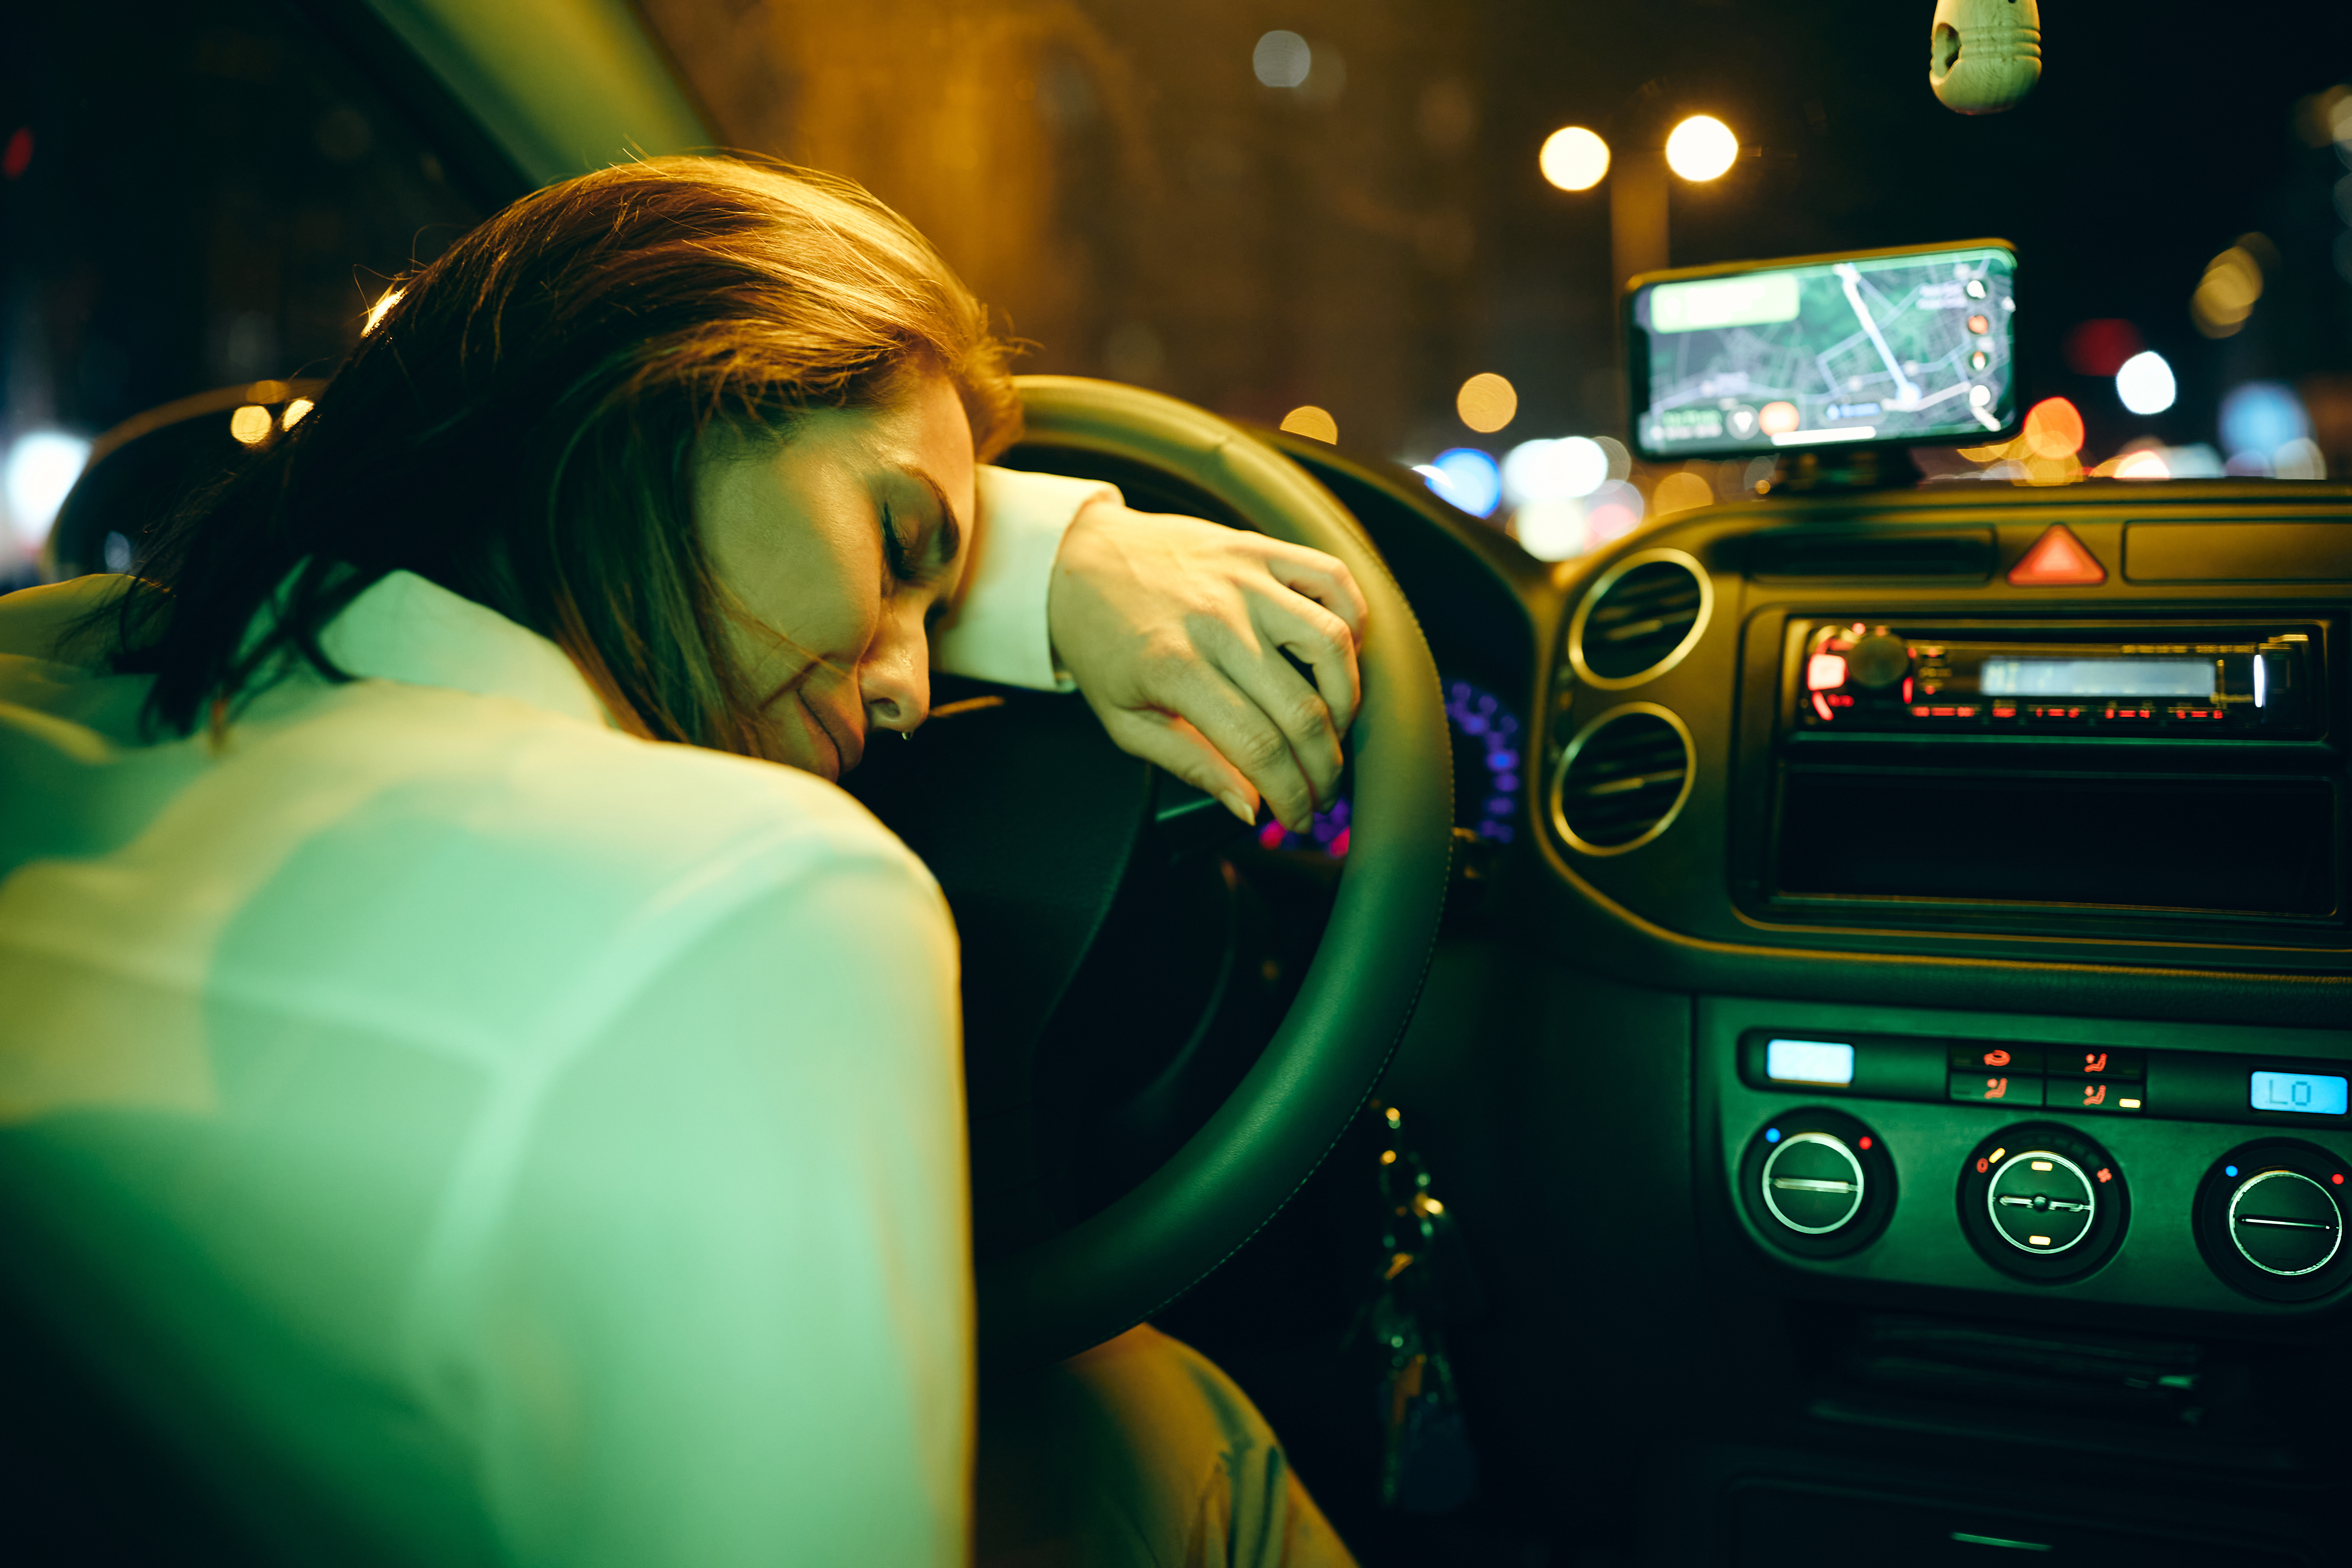 Depressed young woman leaning on the steering wheel of a car and crying | Source: Shutterstock